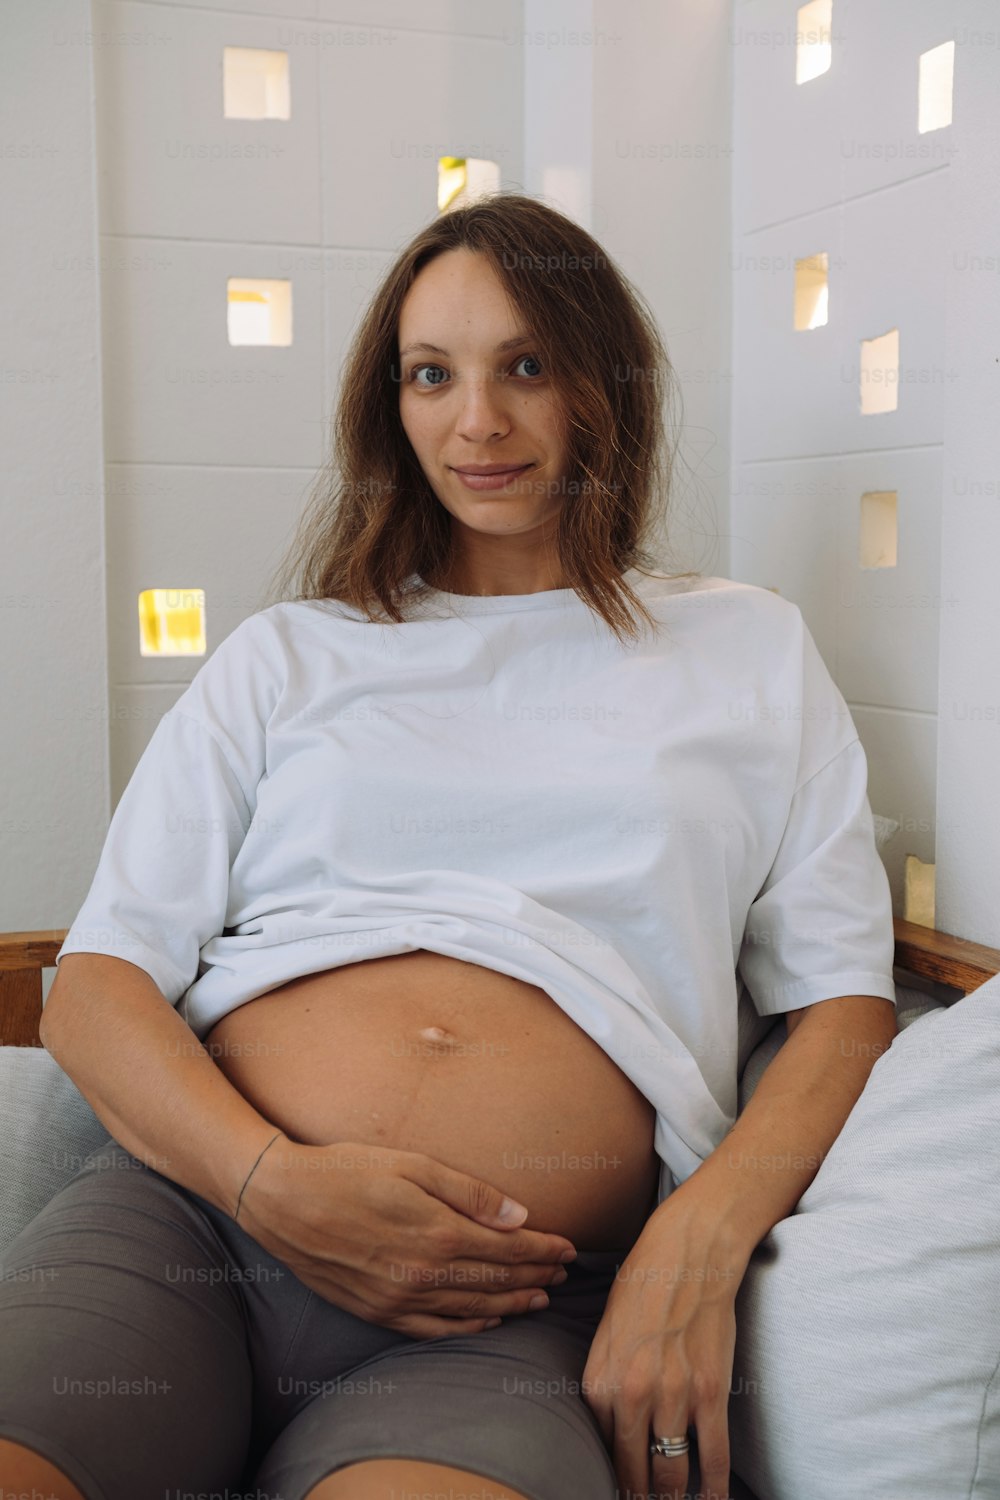 a pregnant woman is sitting on a couch